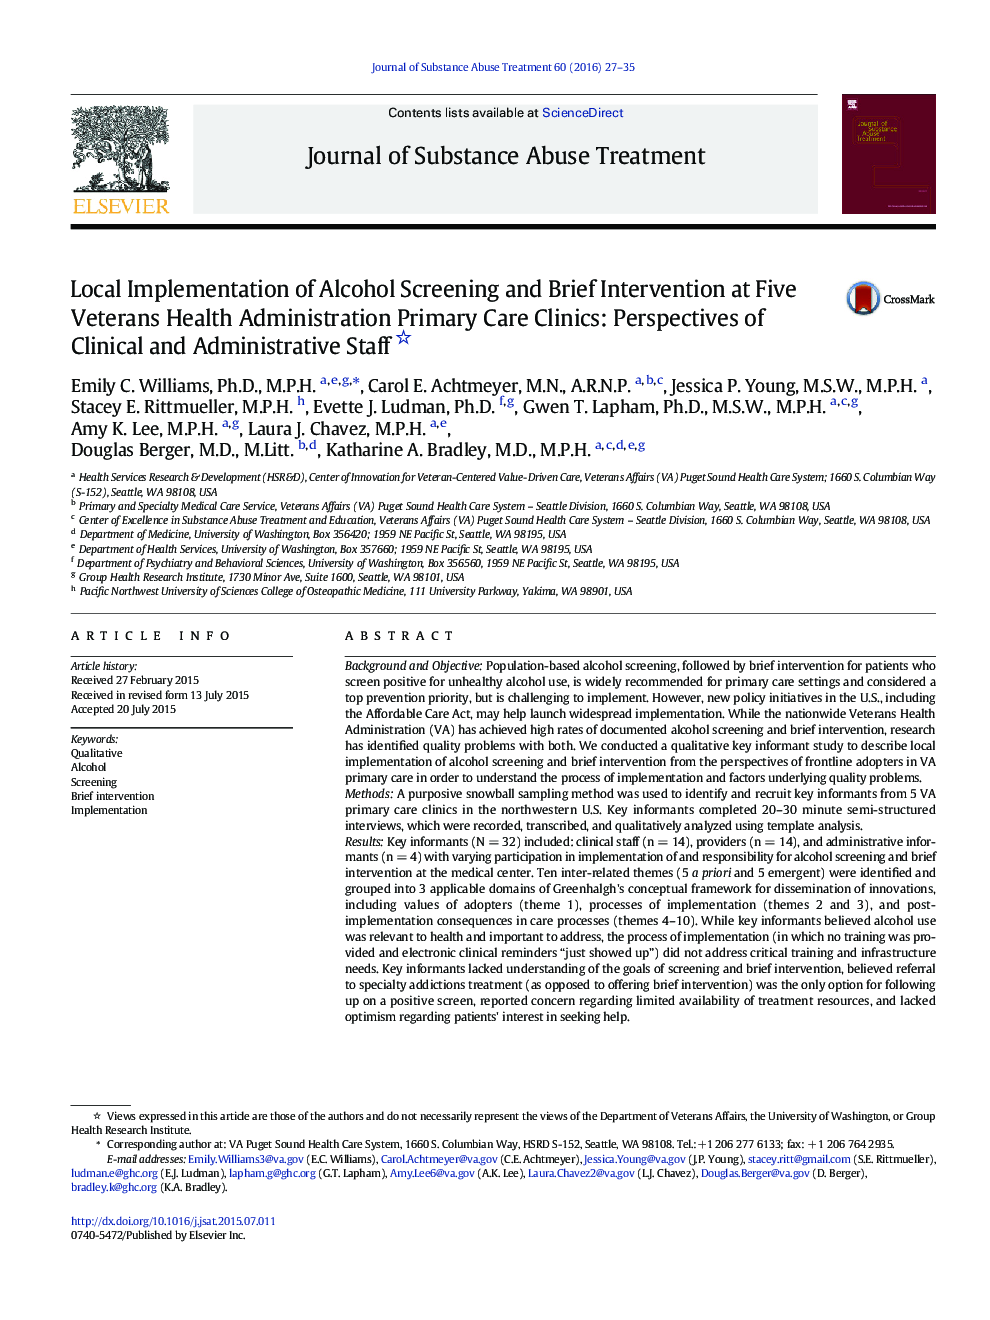 Local Implementation of Alcohol Screening and Brief Intervention at Five Veterans Health Administration Primary Care Clinics: Perspectives of Clinical and Administrative Staff 